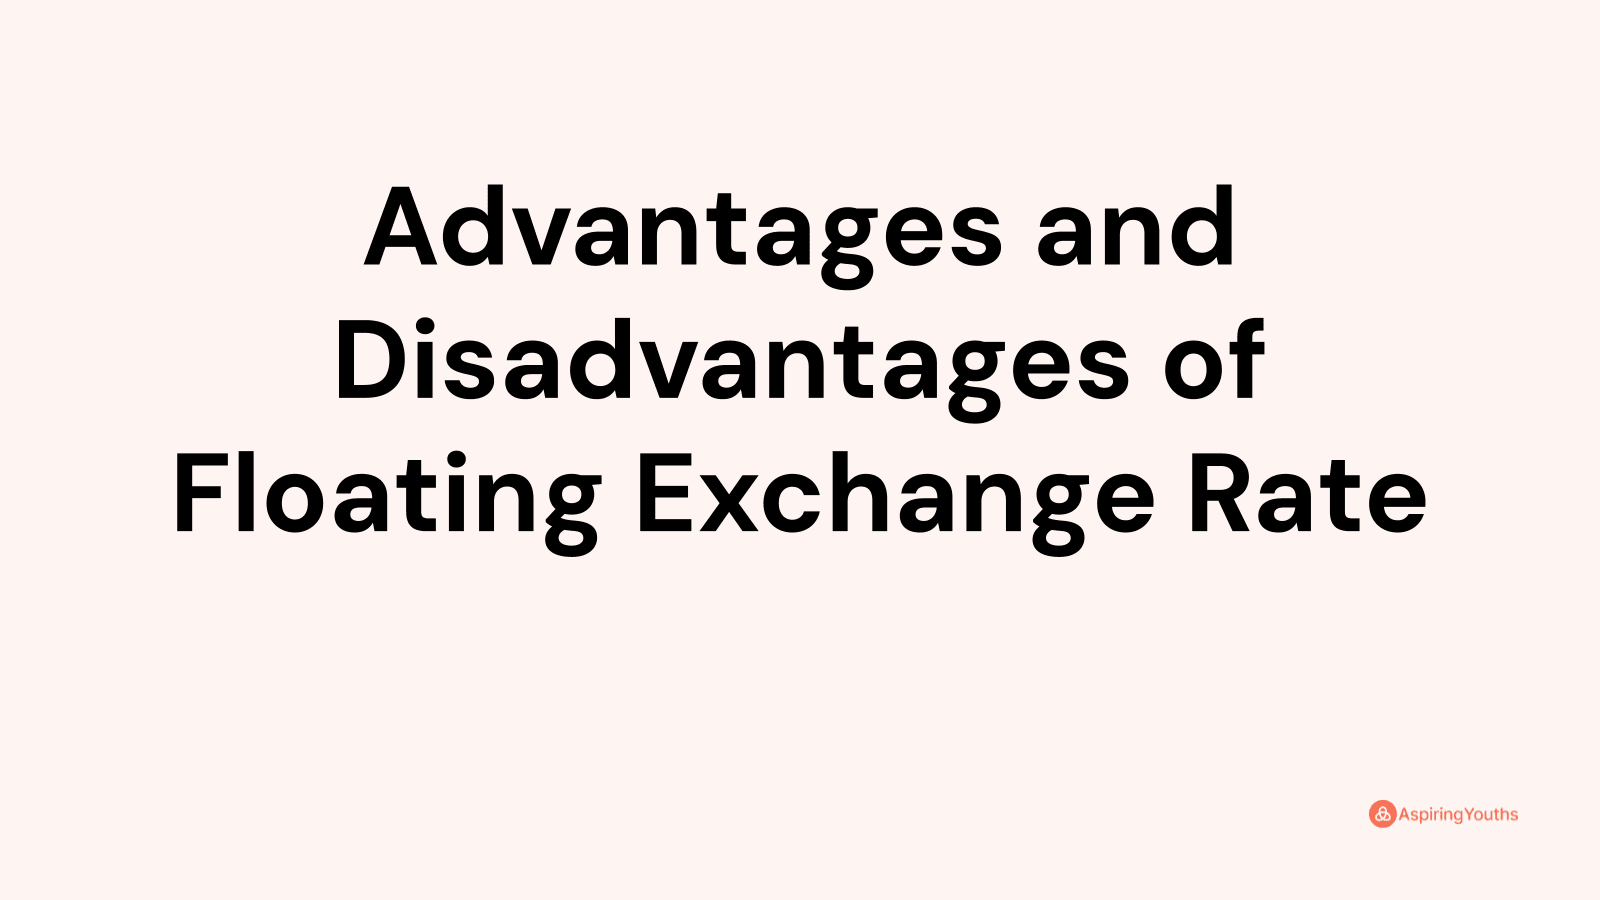 Advantages and disadvantages of Floating Exchange Rate